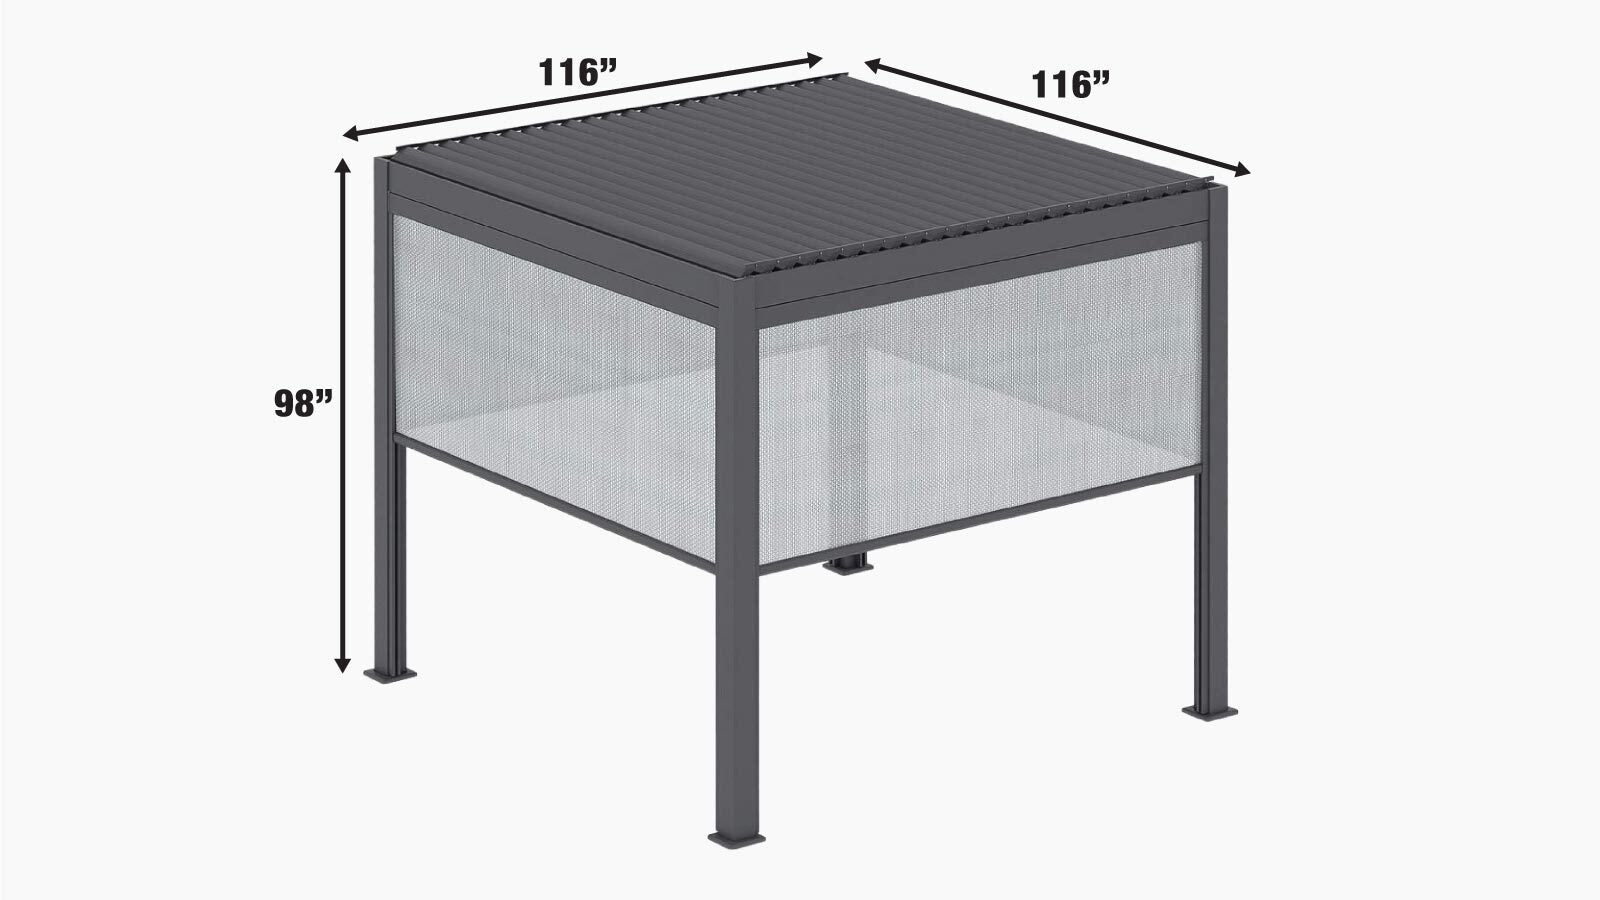 TMG LIVING 10' x 10' Aluminum Motorized Louver Roof Pergola with Side Screens, TMG-LPG11-specifications-image